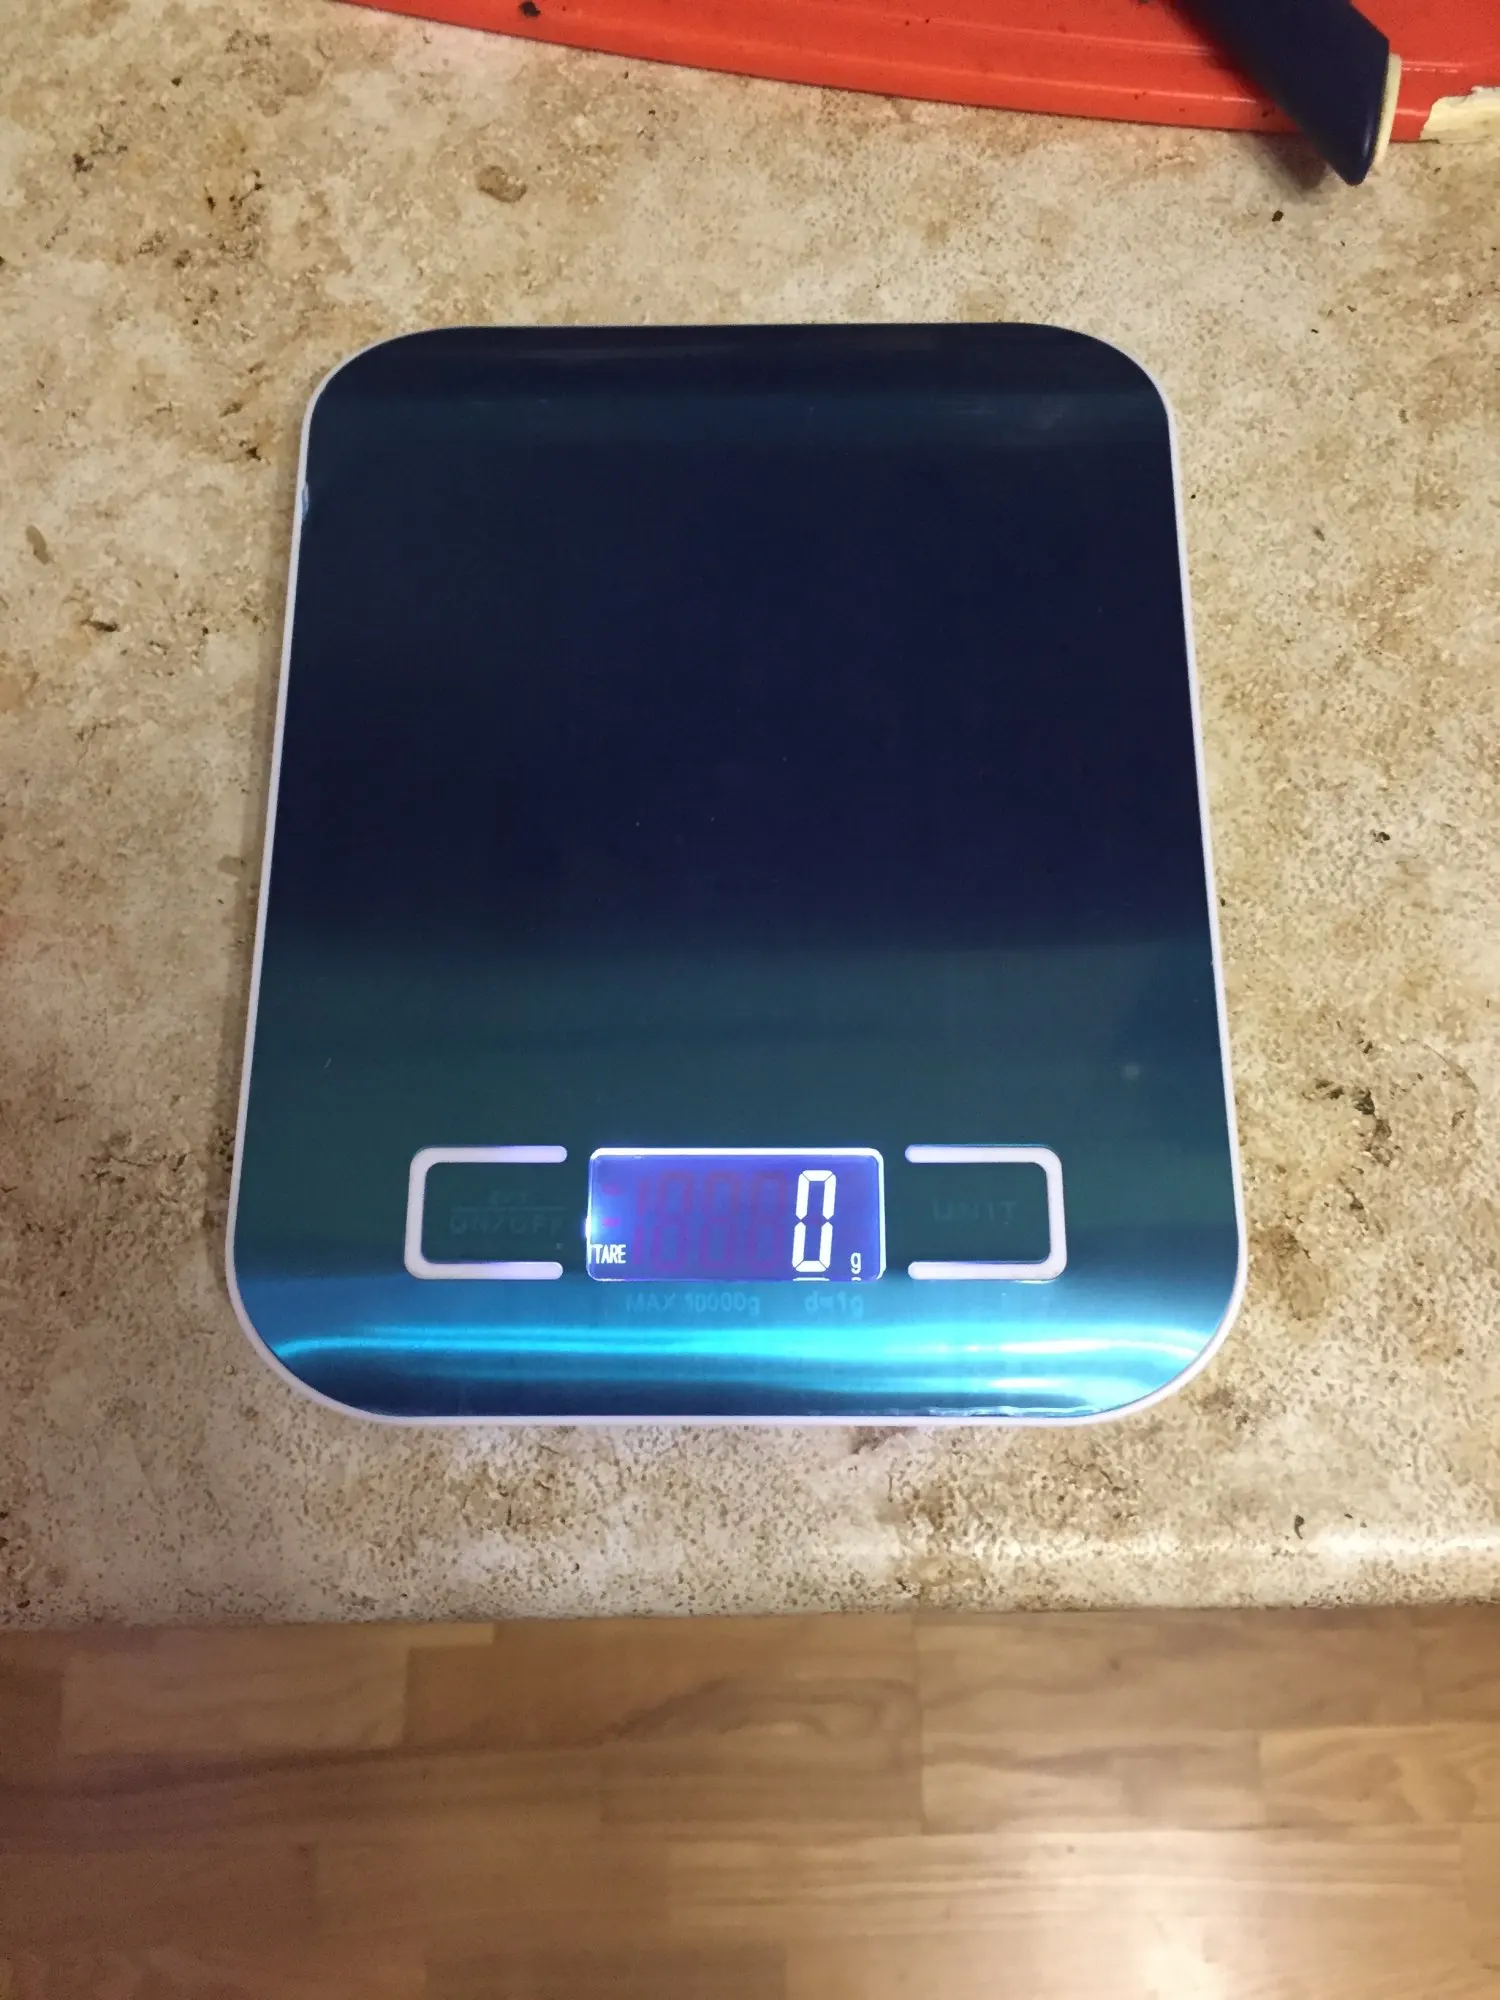 ScaleSmart™ - Digital Scale With LCD Display for Food Measuring! photo review